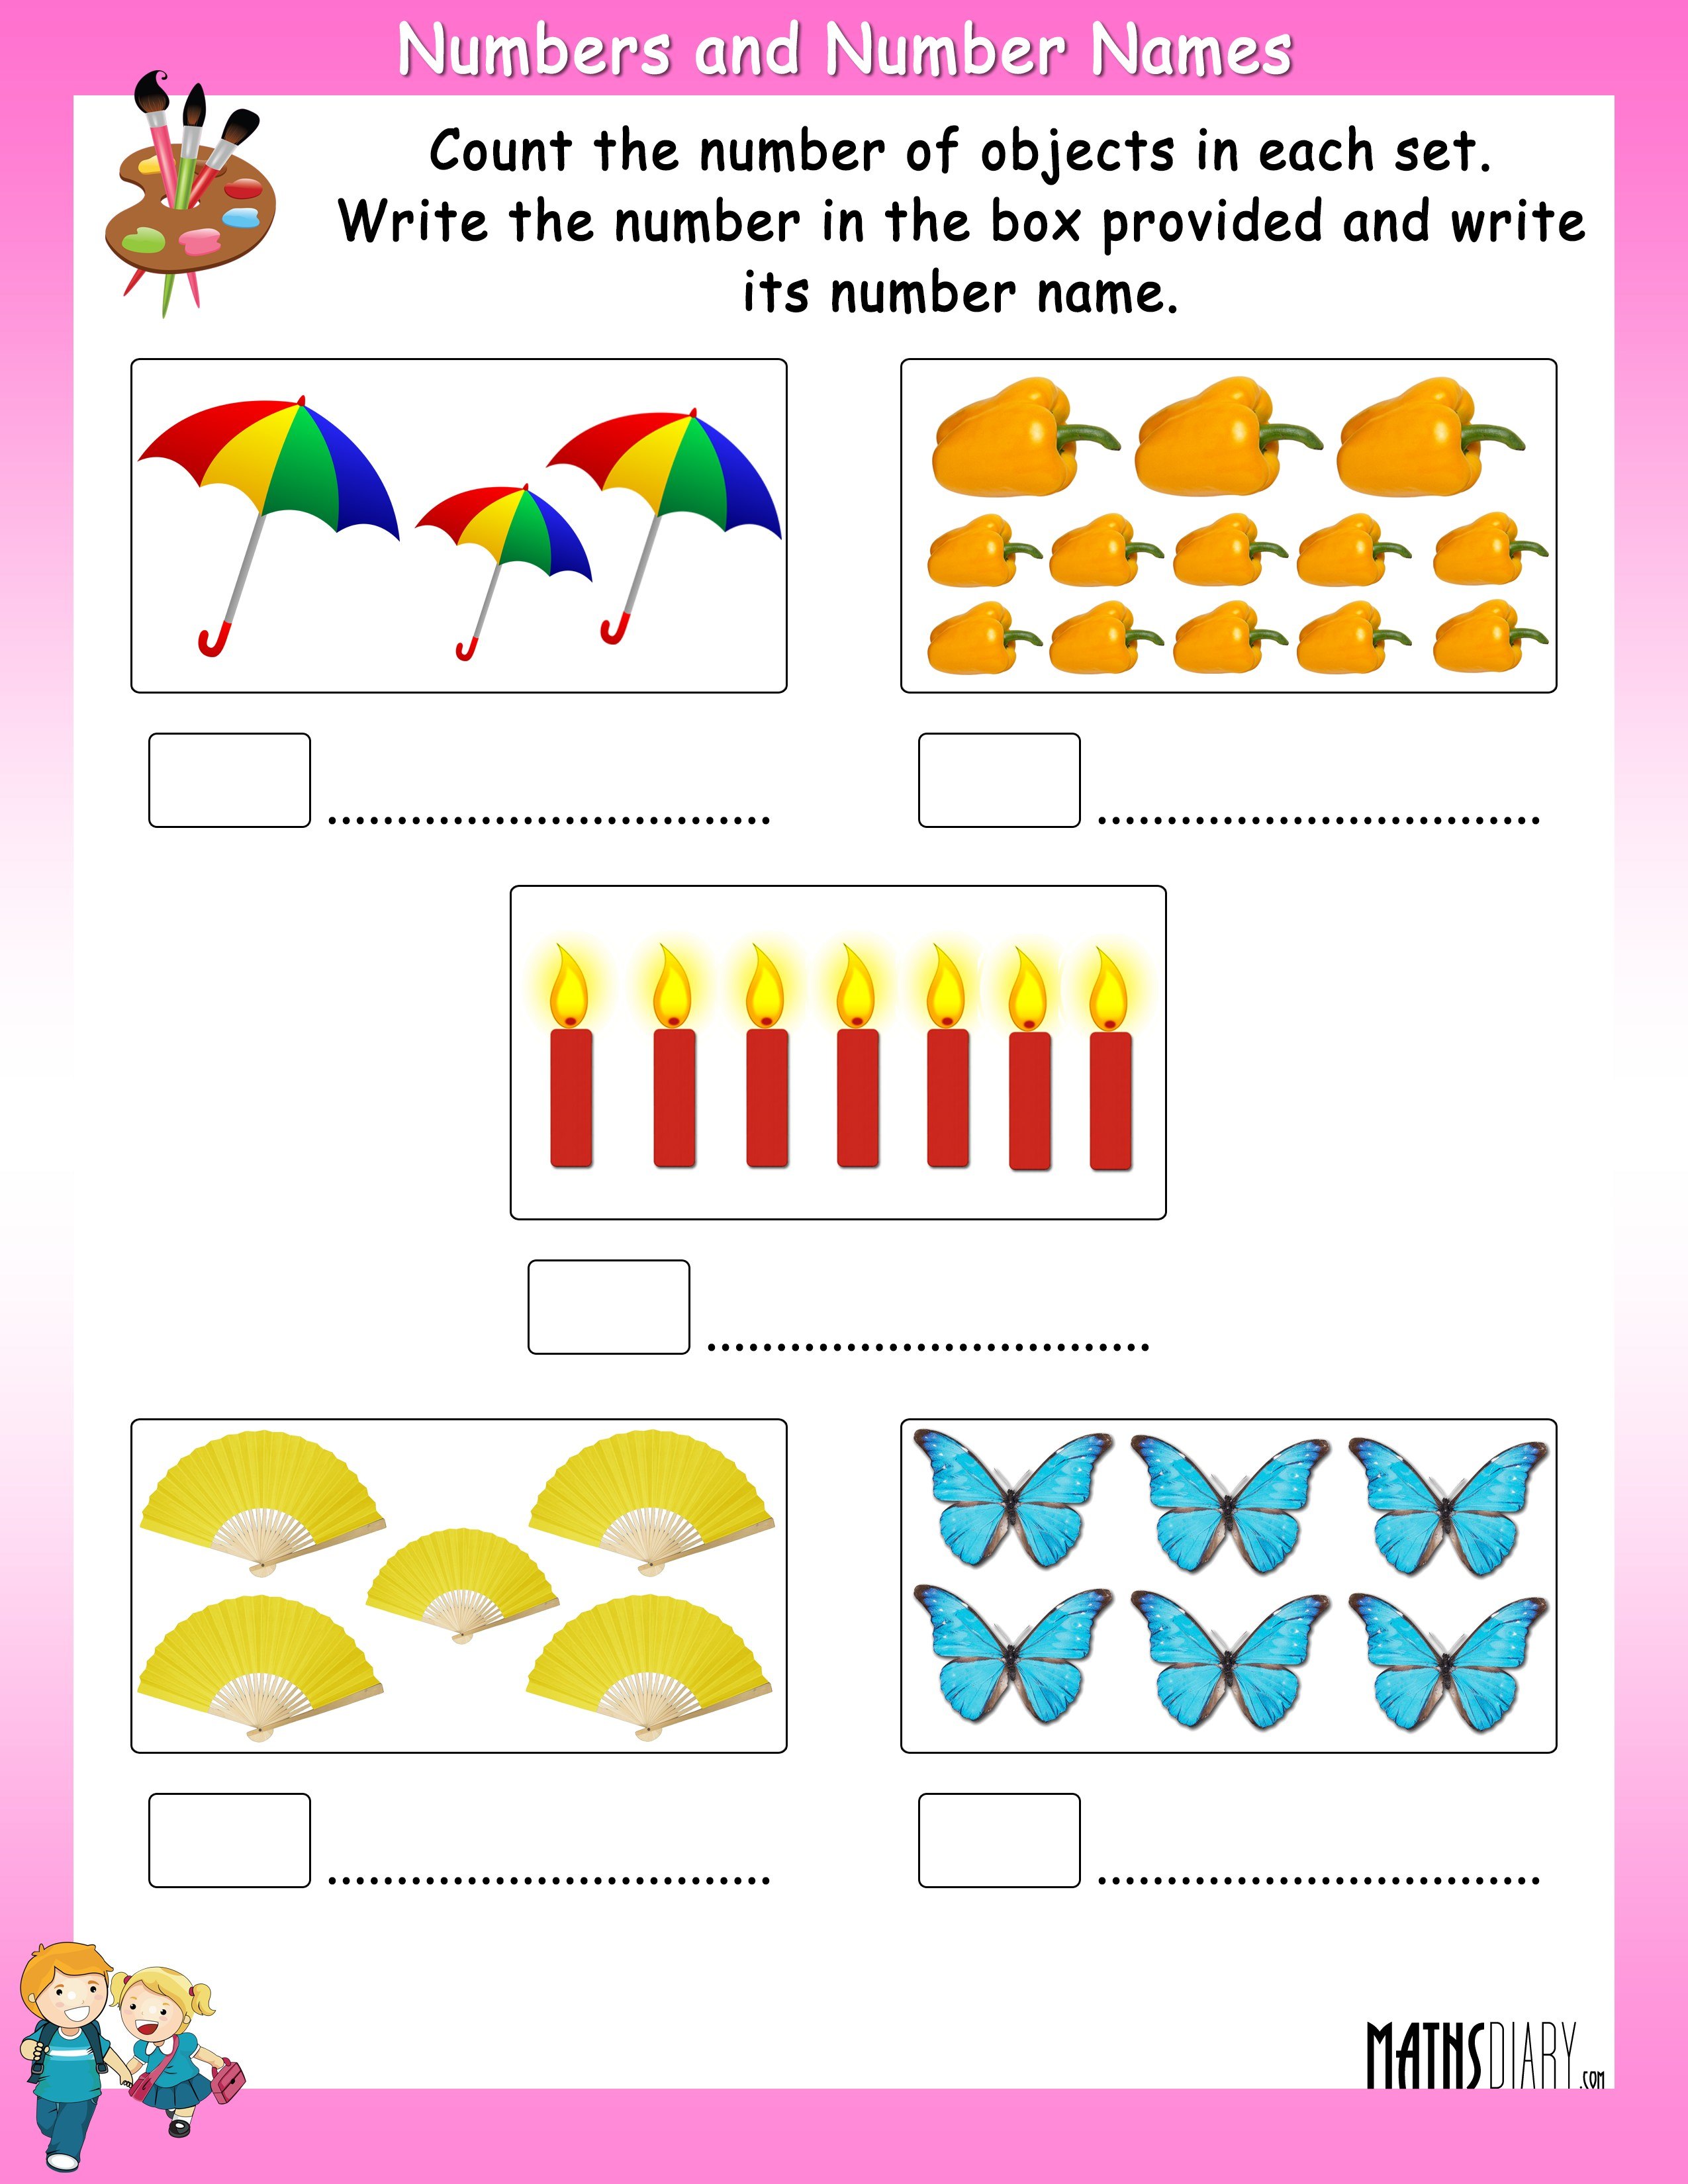 count-the-objects-in-each-set-and-write-its-number-and-number-name-worksheets-math-worksheets